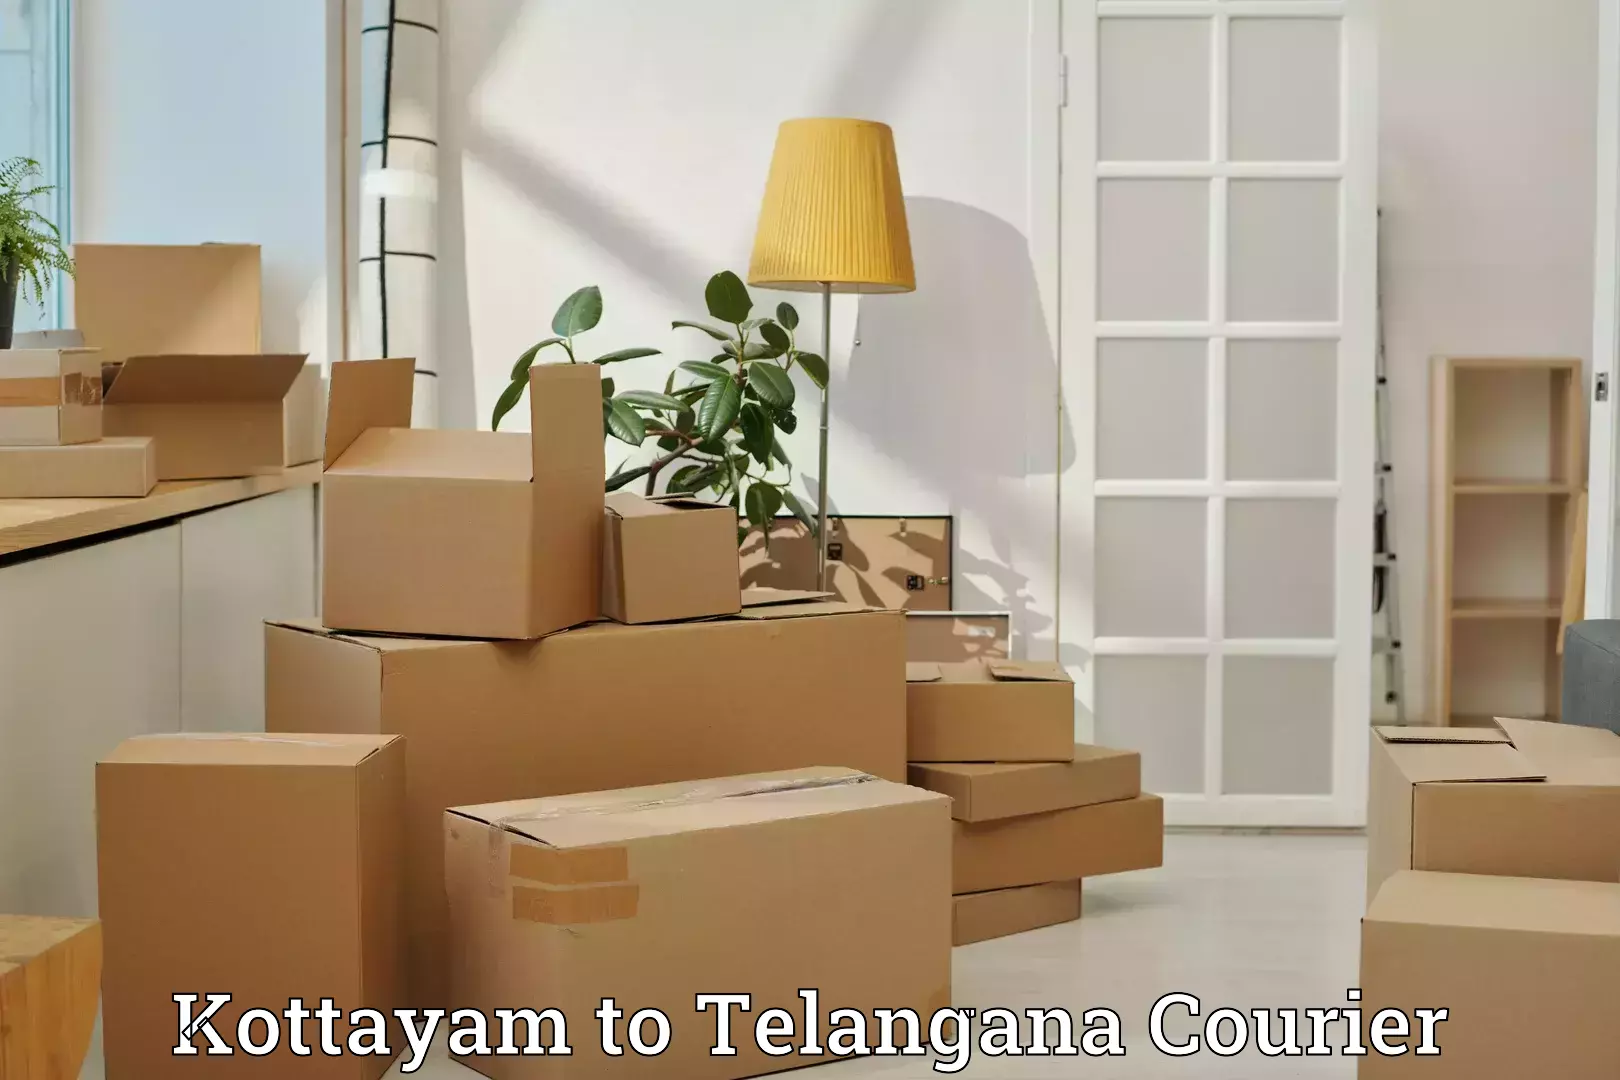 Luggage transport consulting Kottayam to Trimulgherry